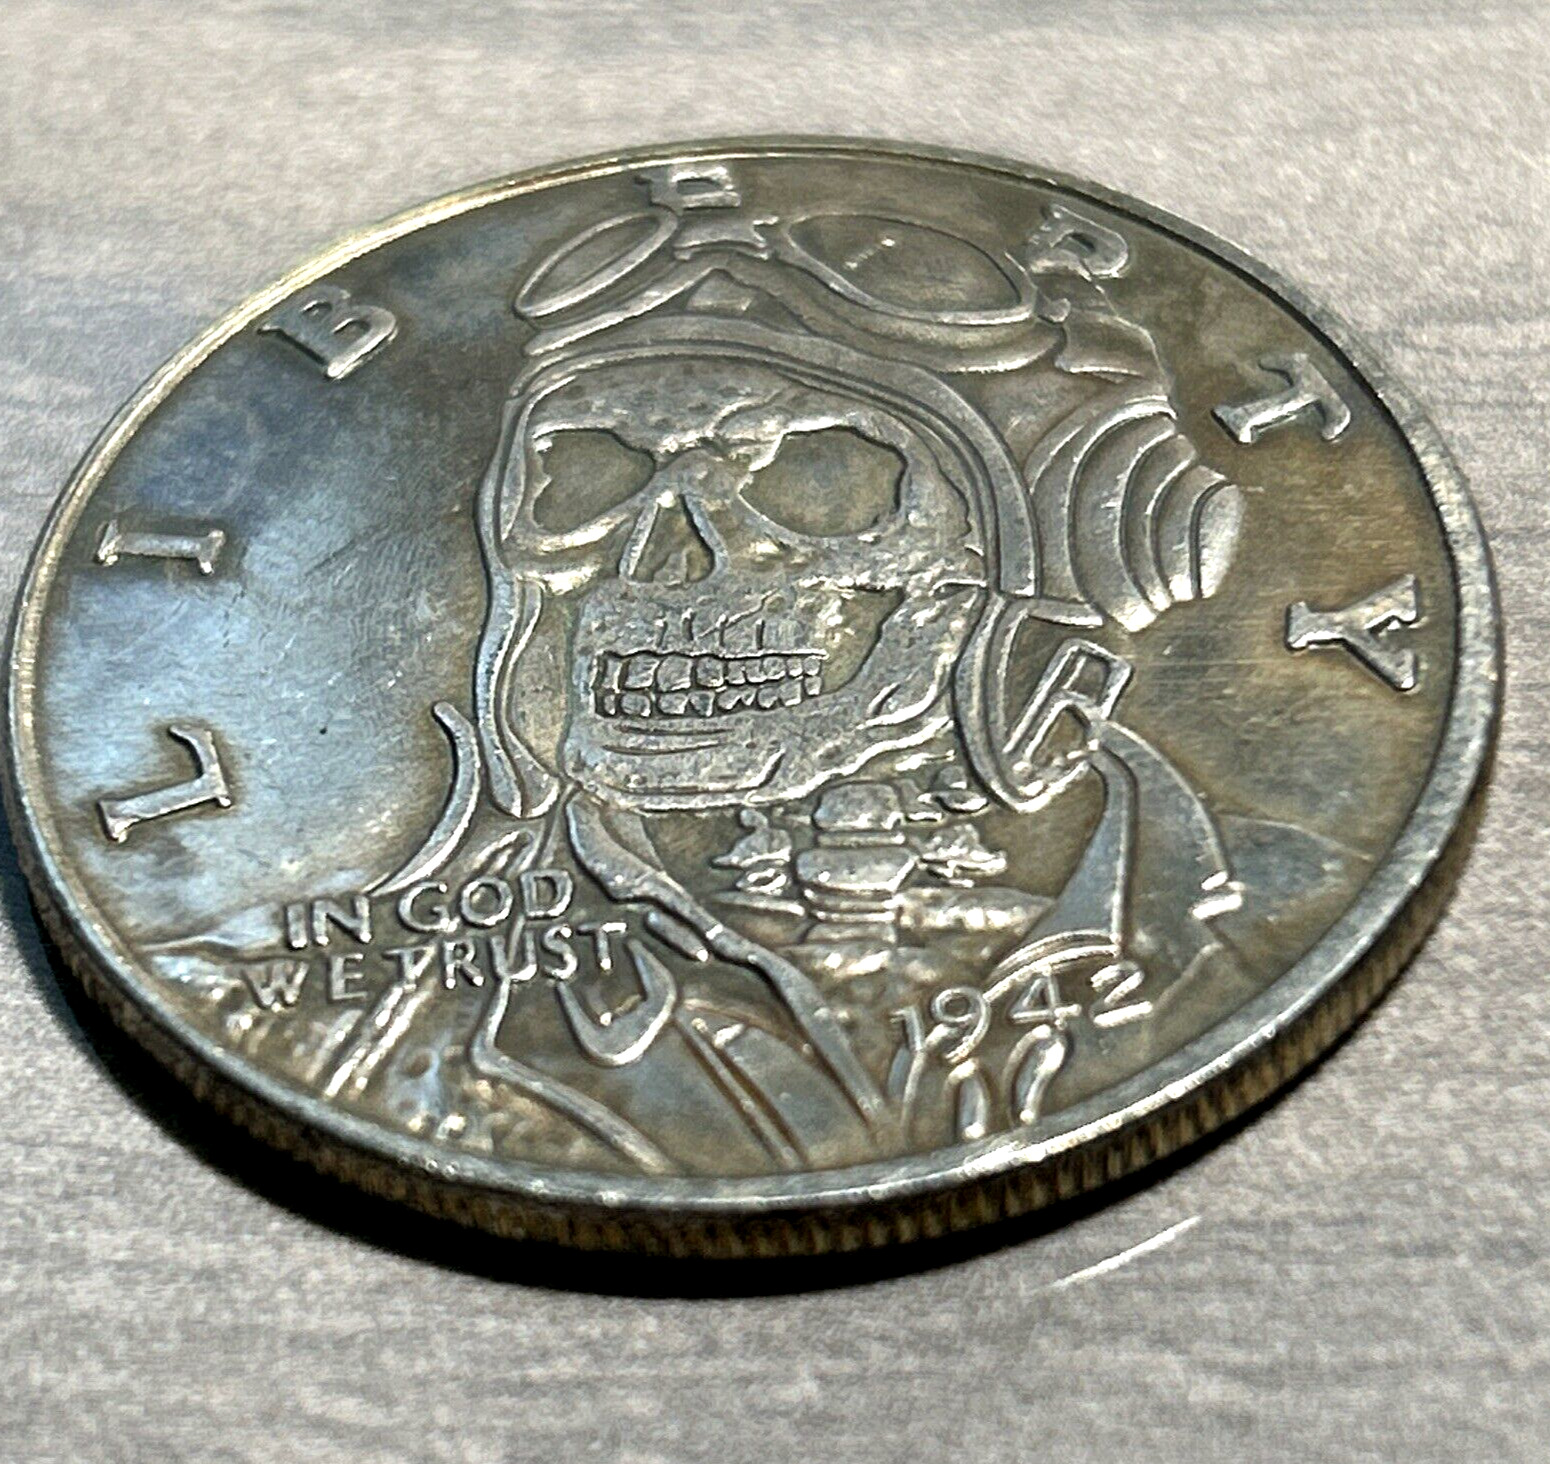 SKULL PILOT Challenge Coin Novelty Lucky Heads Tails IN STOCK SHIPS IN 24HRS